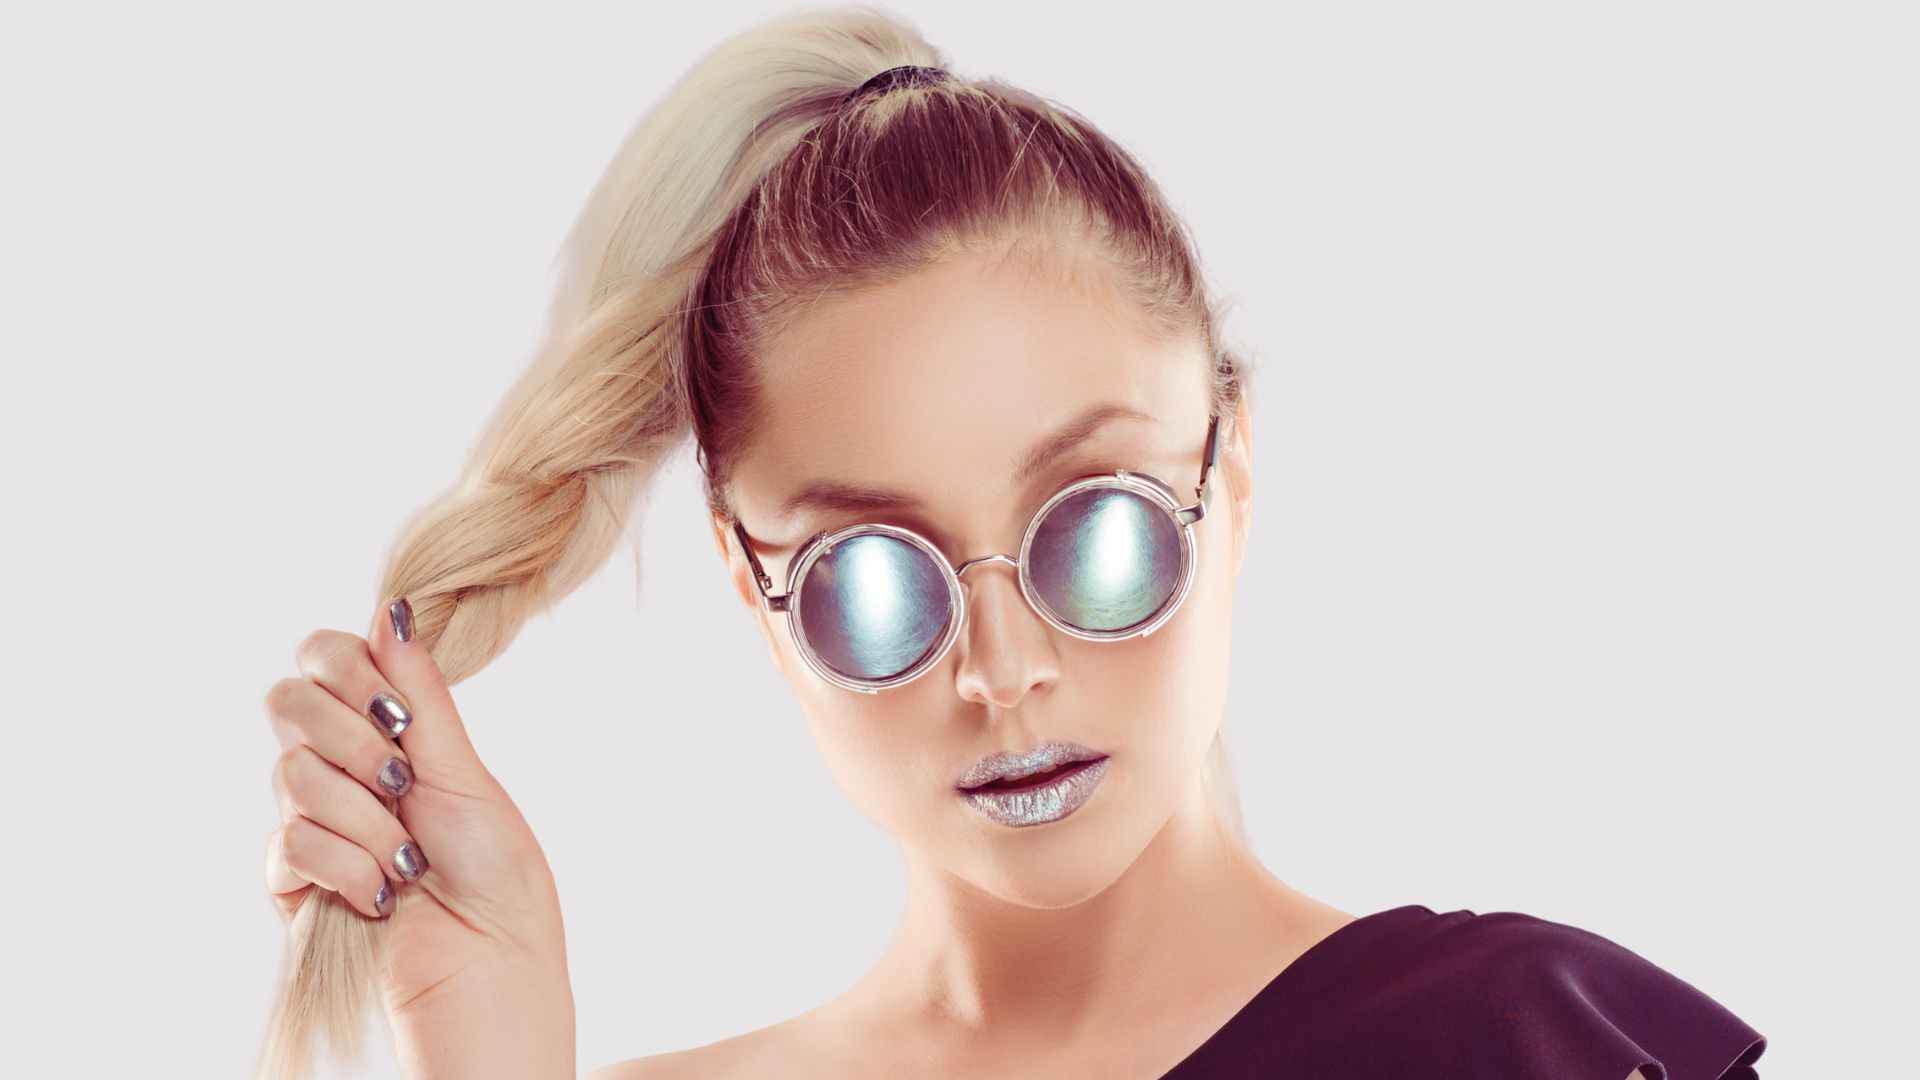 Female model wearing sunglasses holding hair in a twisted ponytail